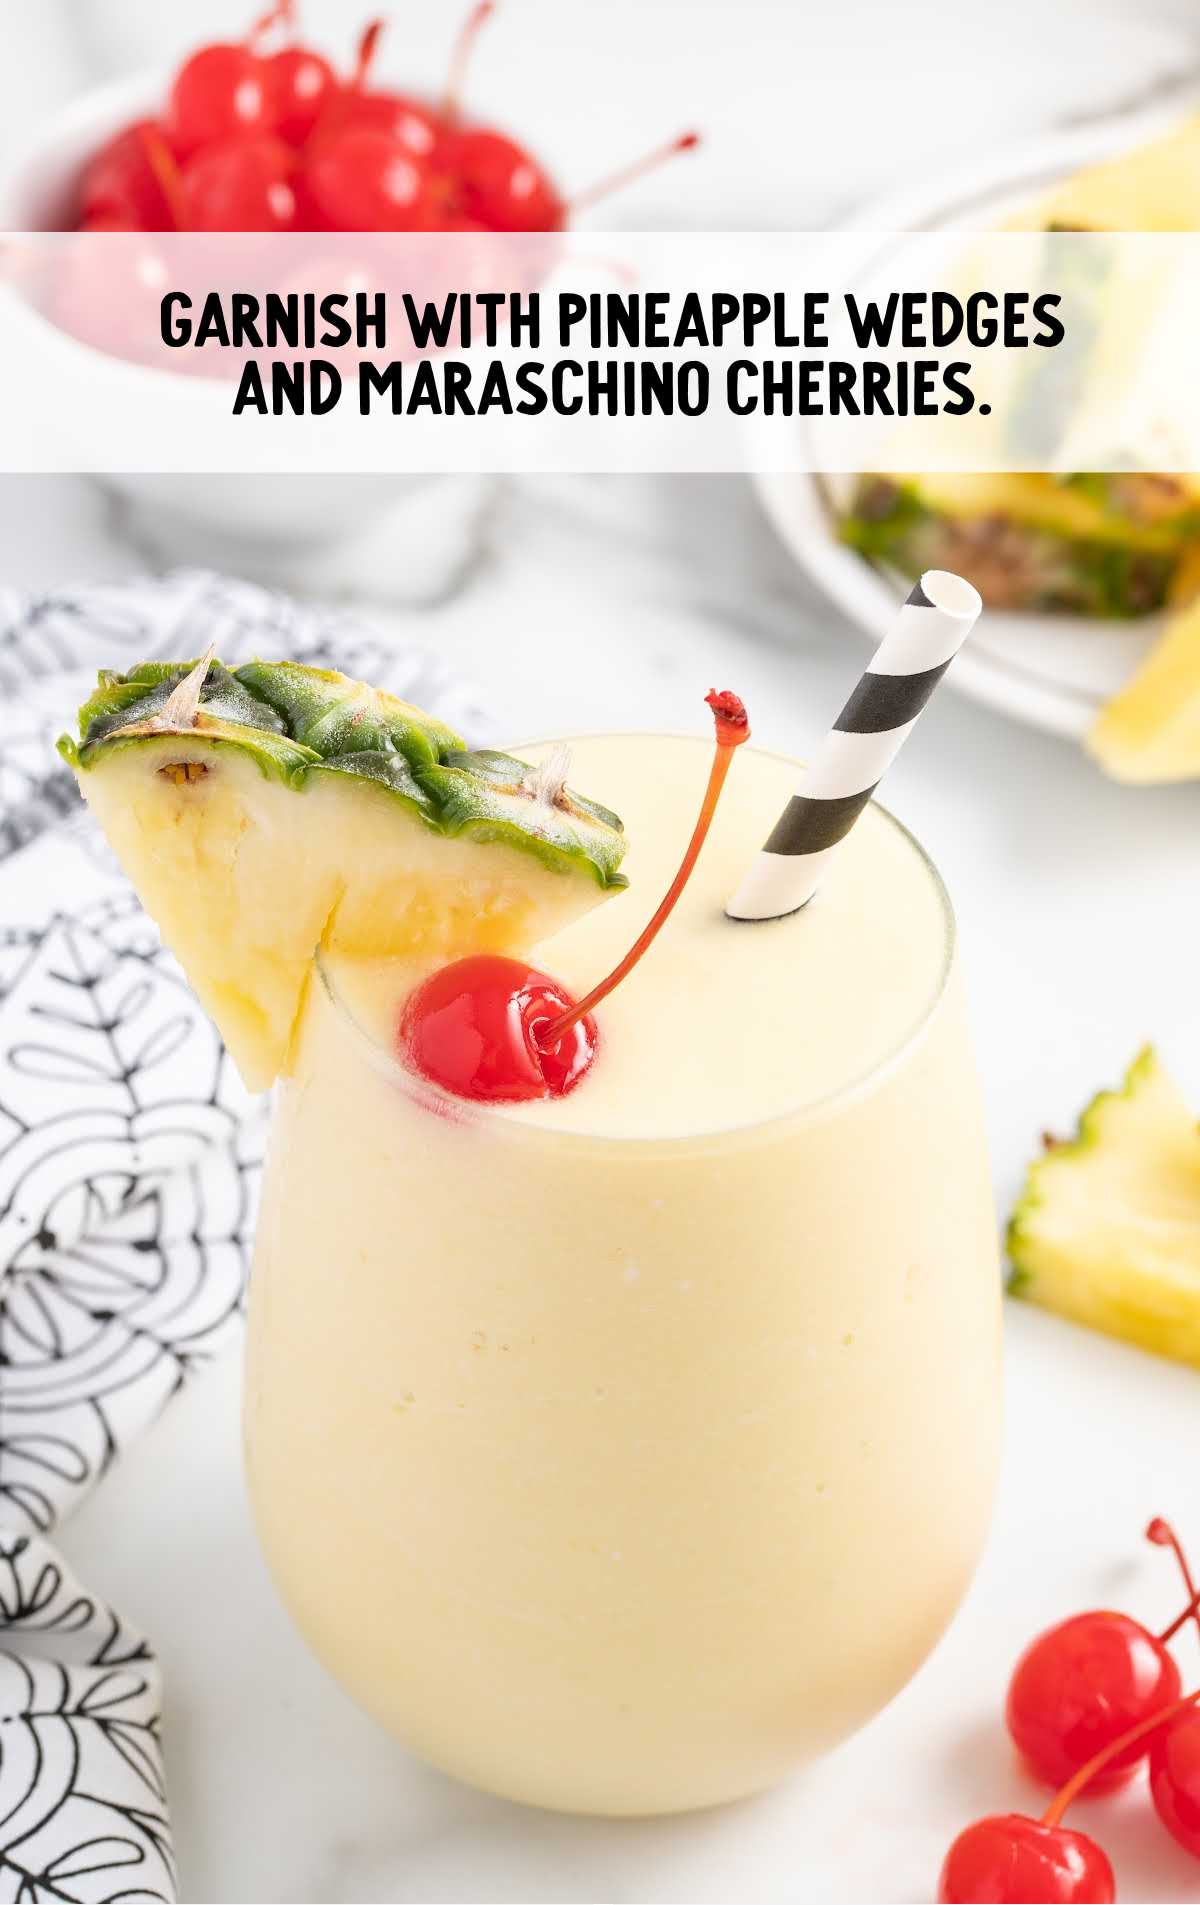 a glass of Pina colada garnished with pineapple wedges and the maraschino cherries